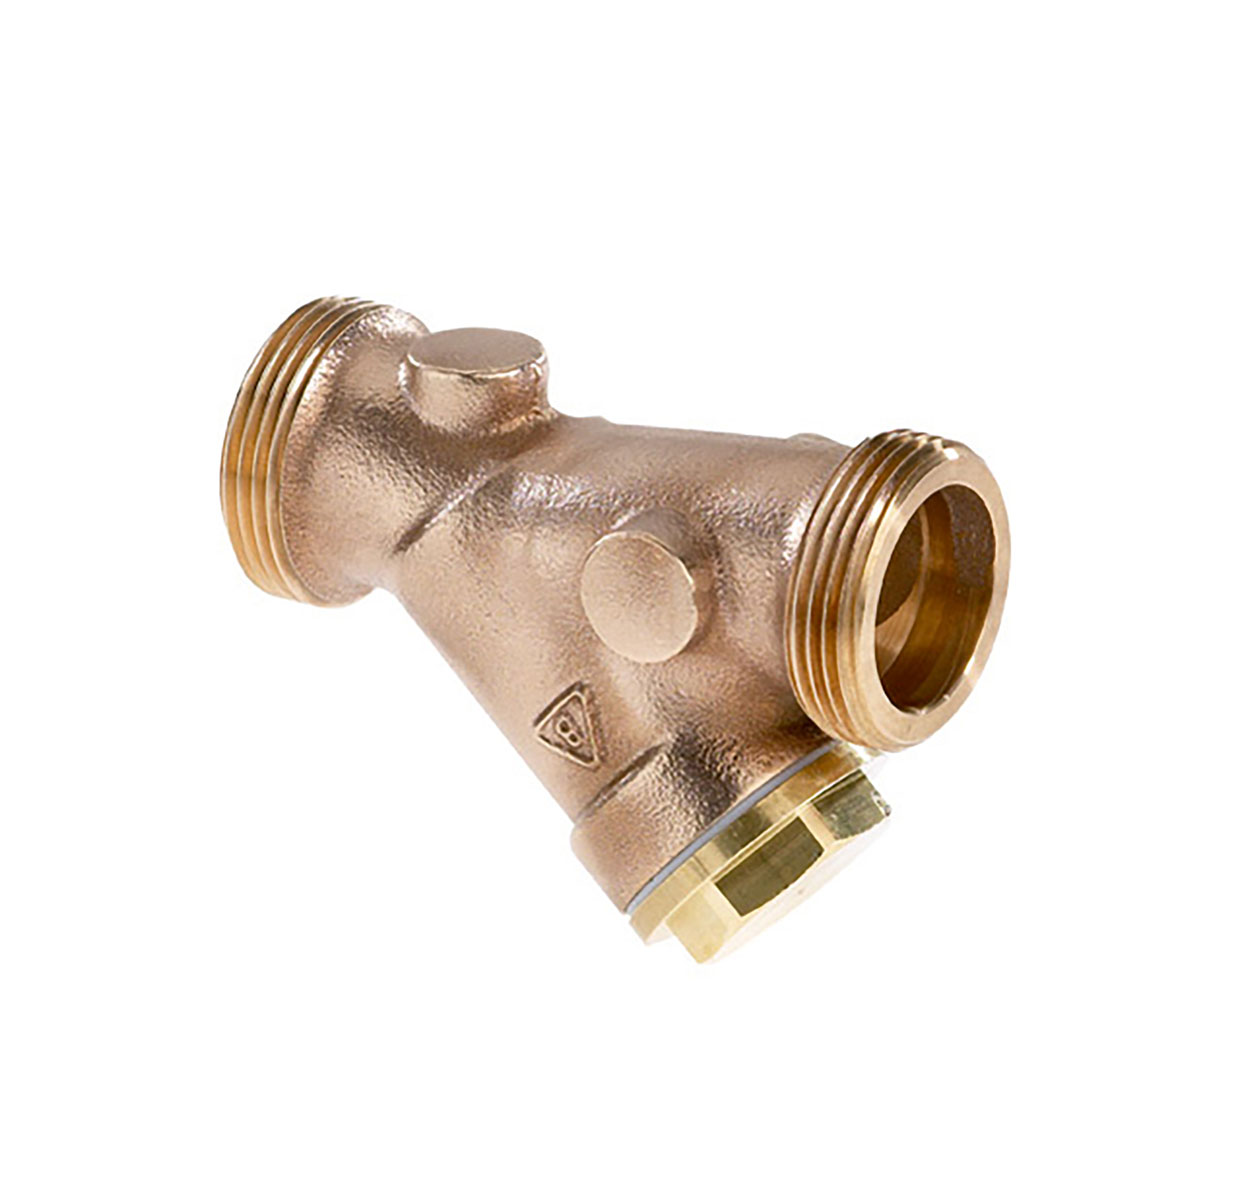 2452250 - Red-brass Strainer Strainer with PTFE-sealing (Teflon)